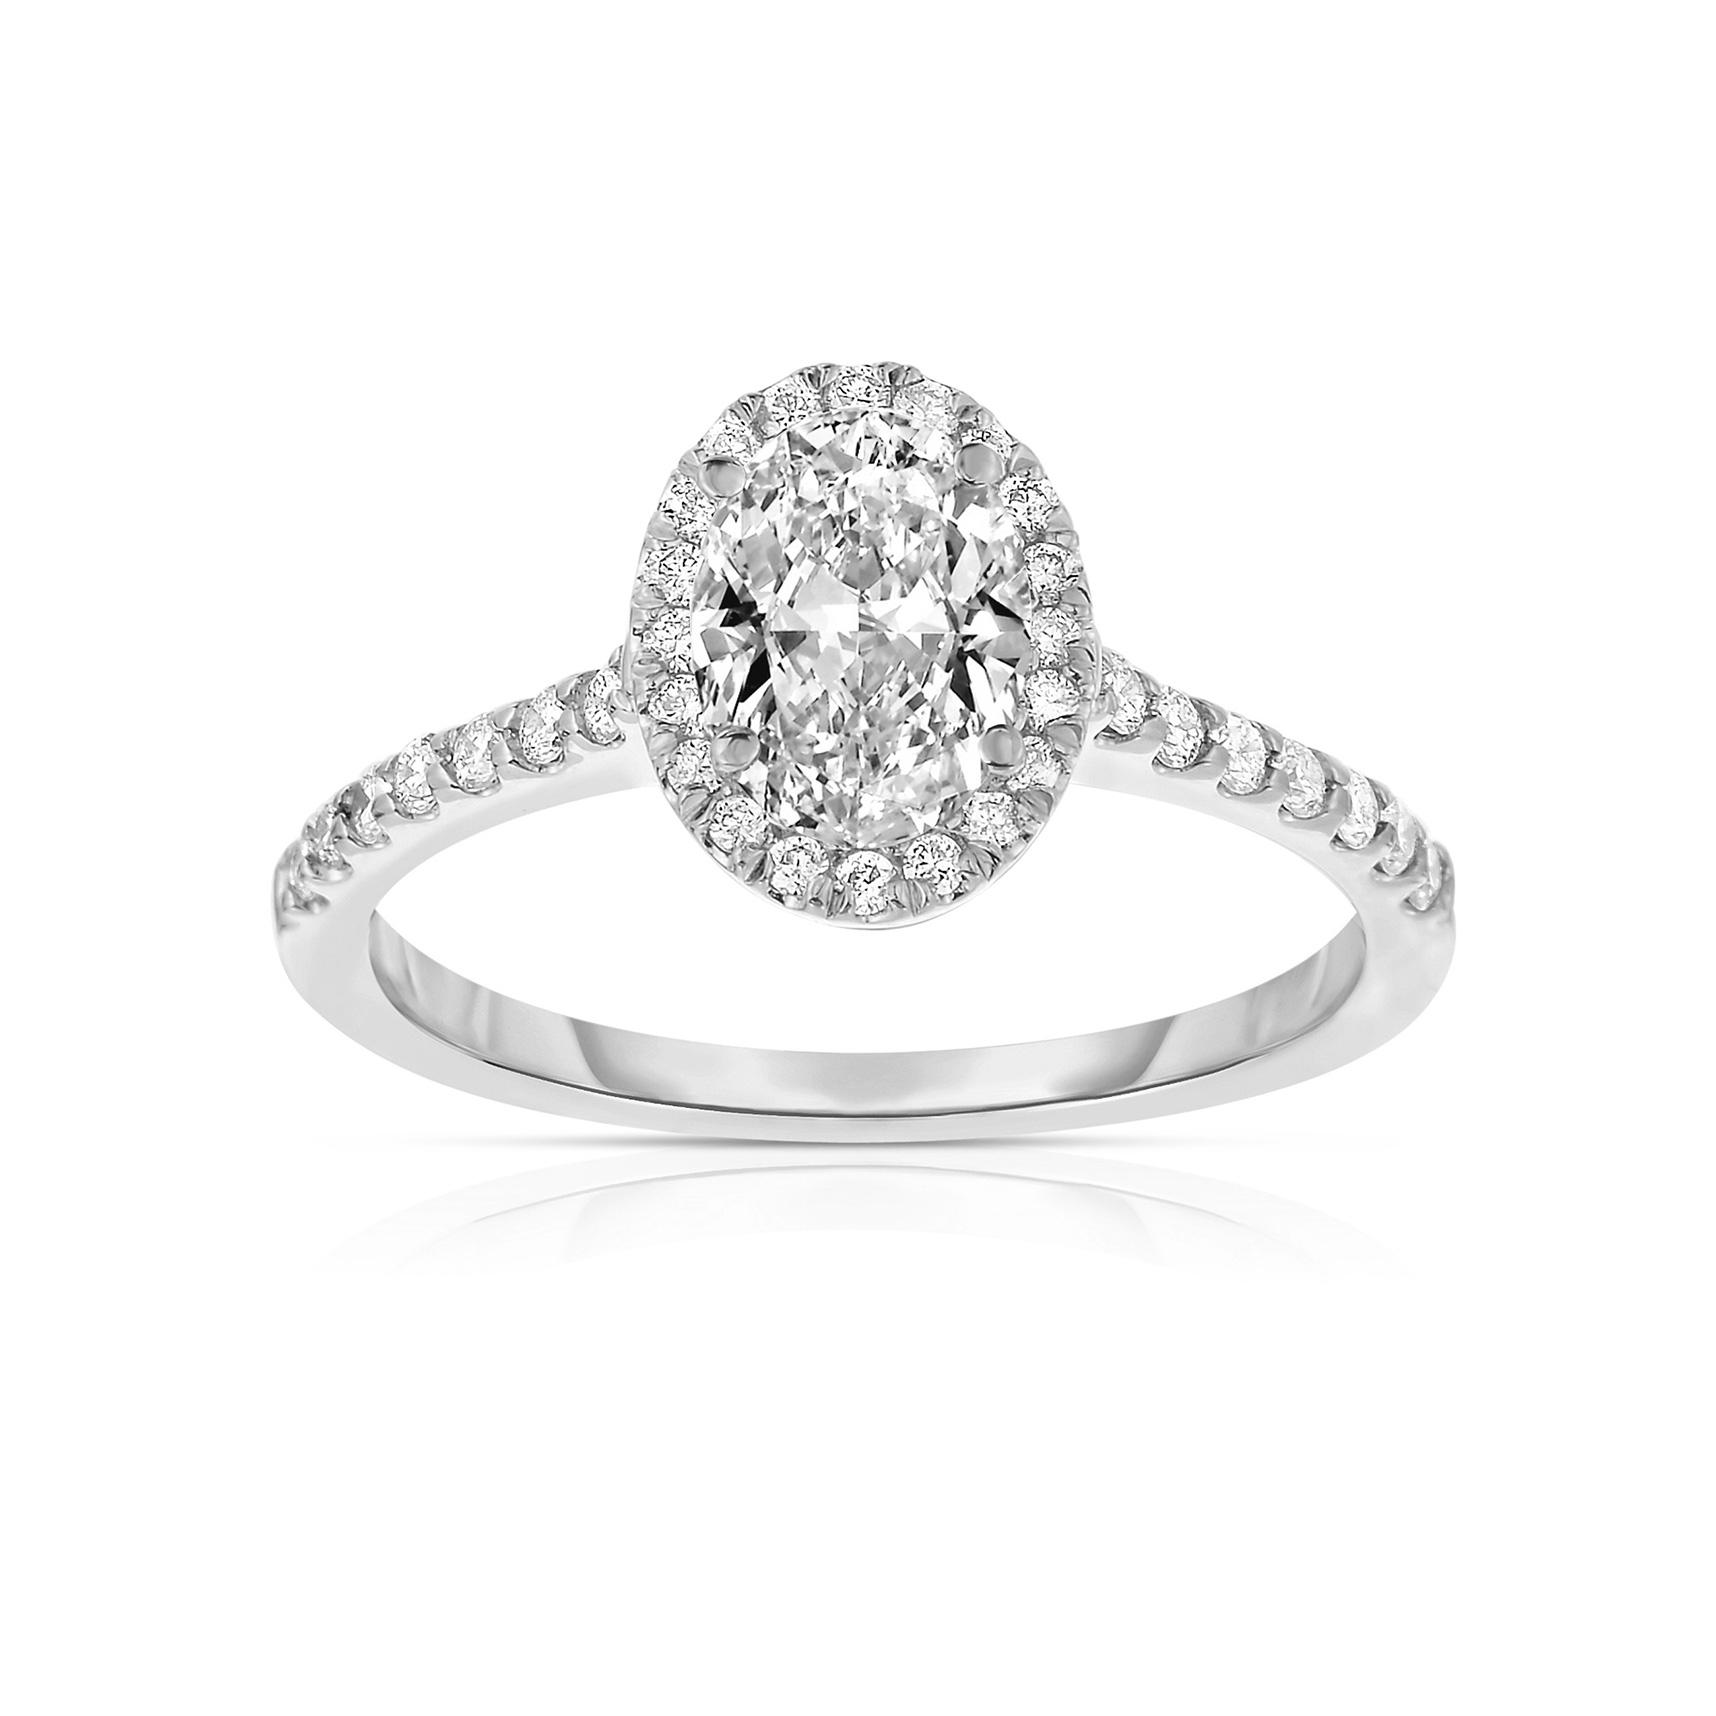 White Gold 1.05 CTW Oval Diamond Halo Engagement Ring